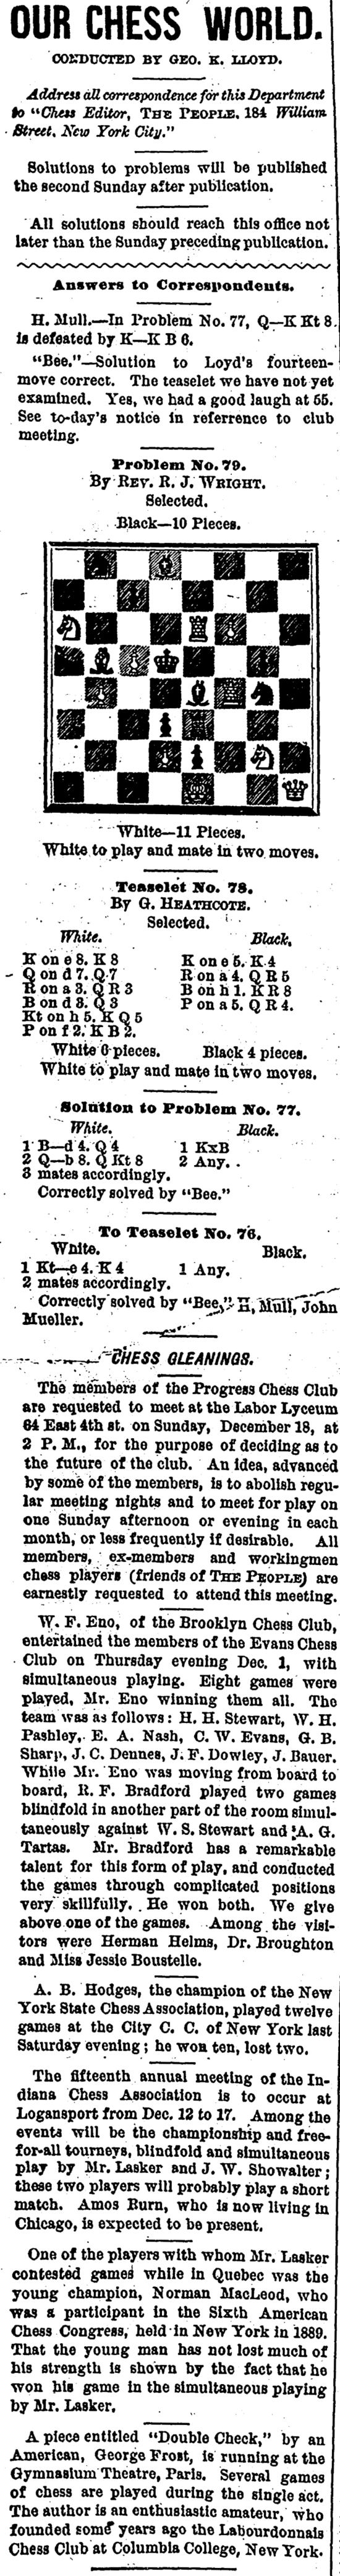 1892.12.11-01 New York People.png